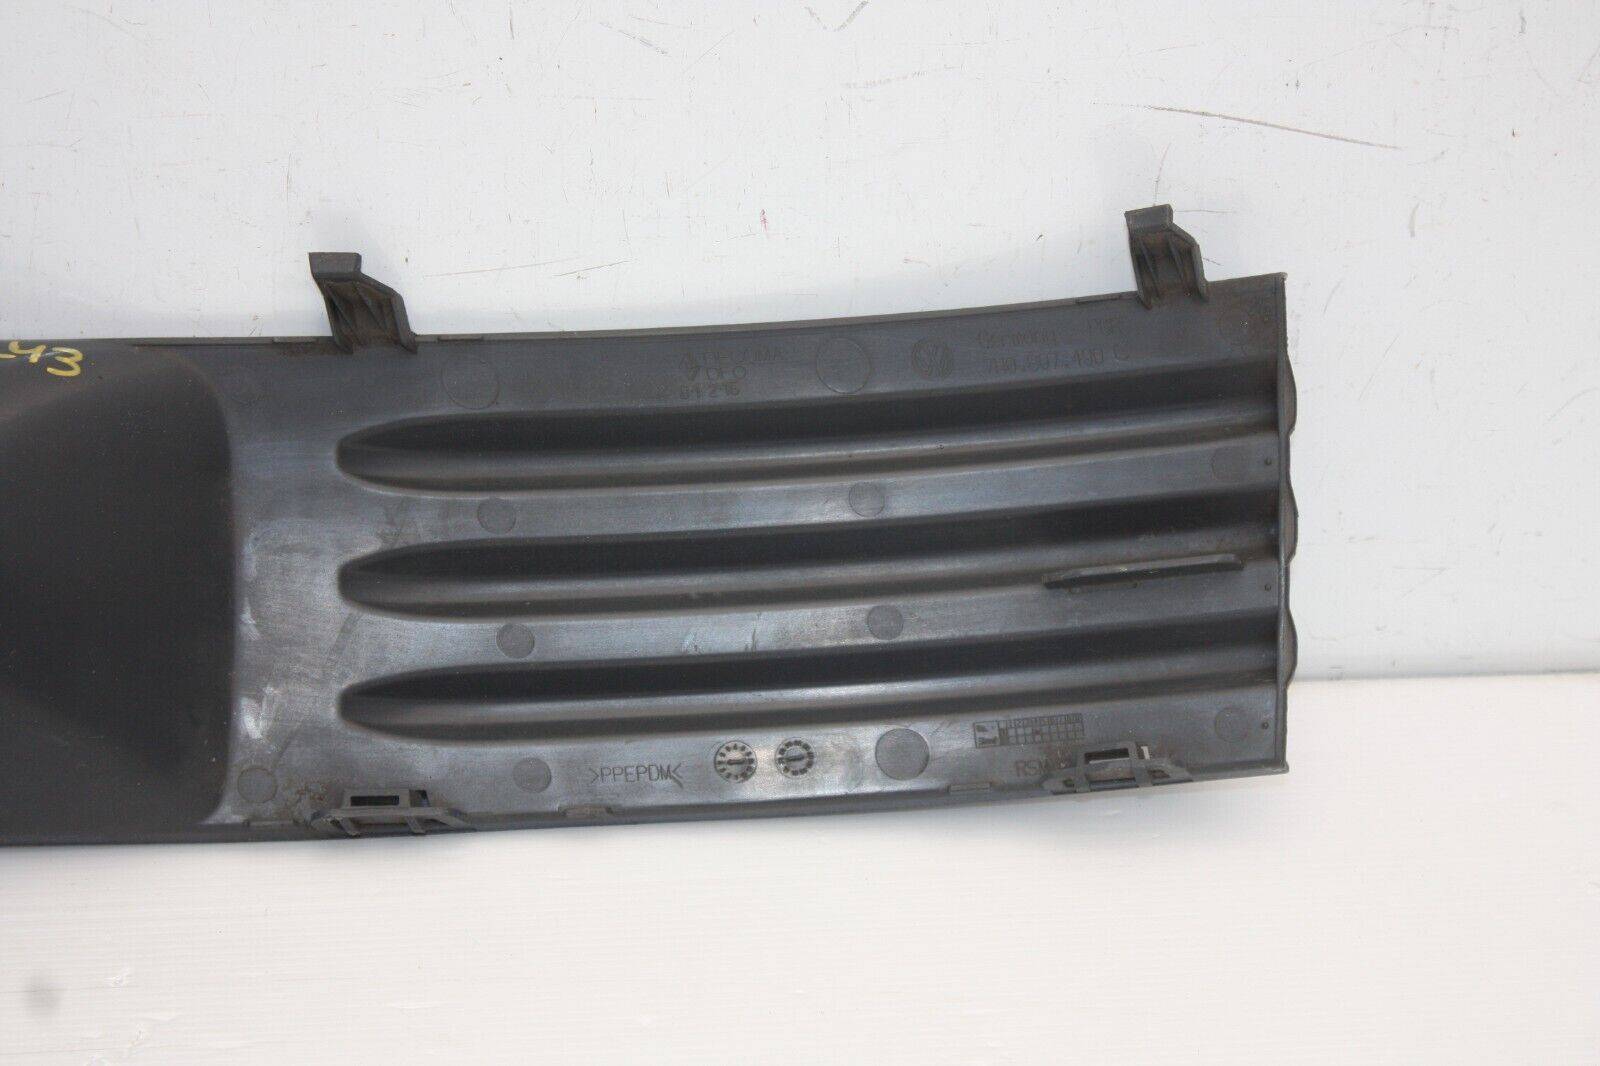 VW-Transporter-Front-Bumper-Right-Grill-Trim-2004-to-2009-7H0807490C-Genuine-176029790443-9